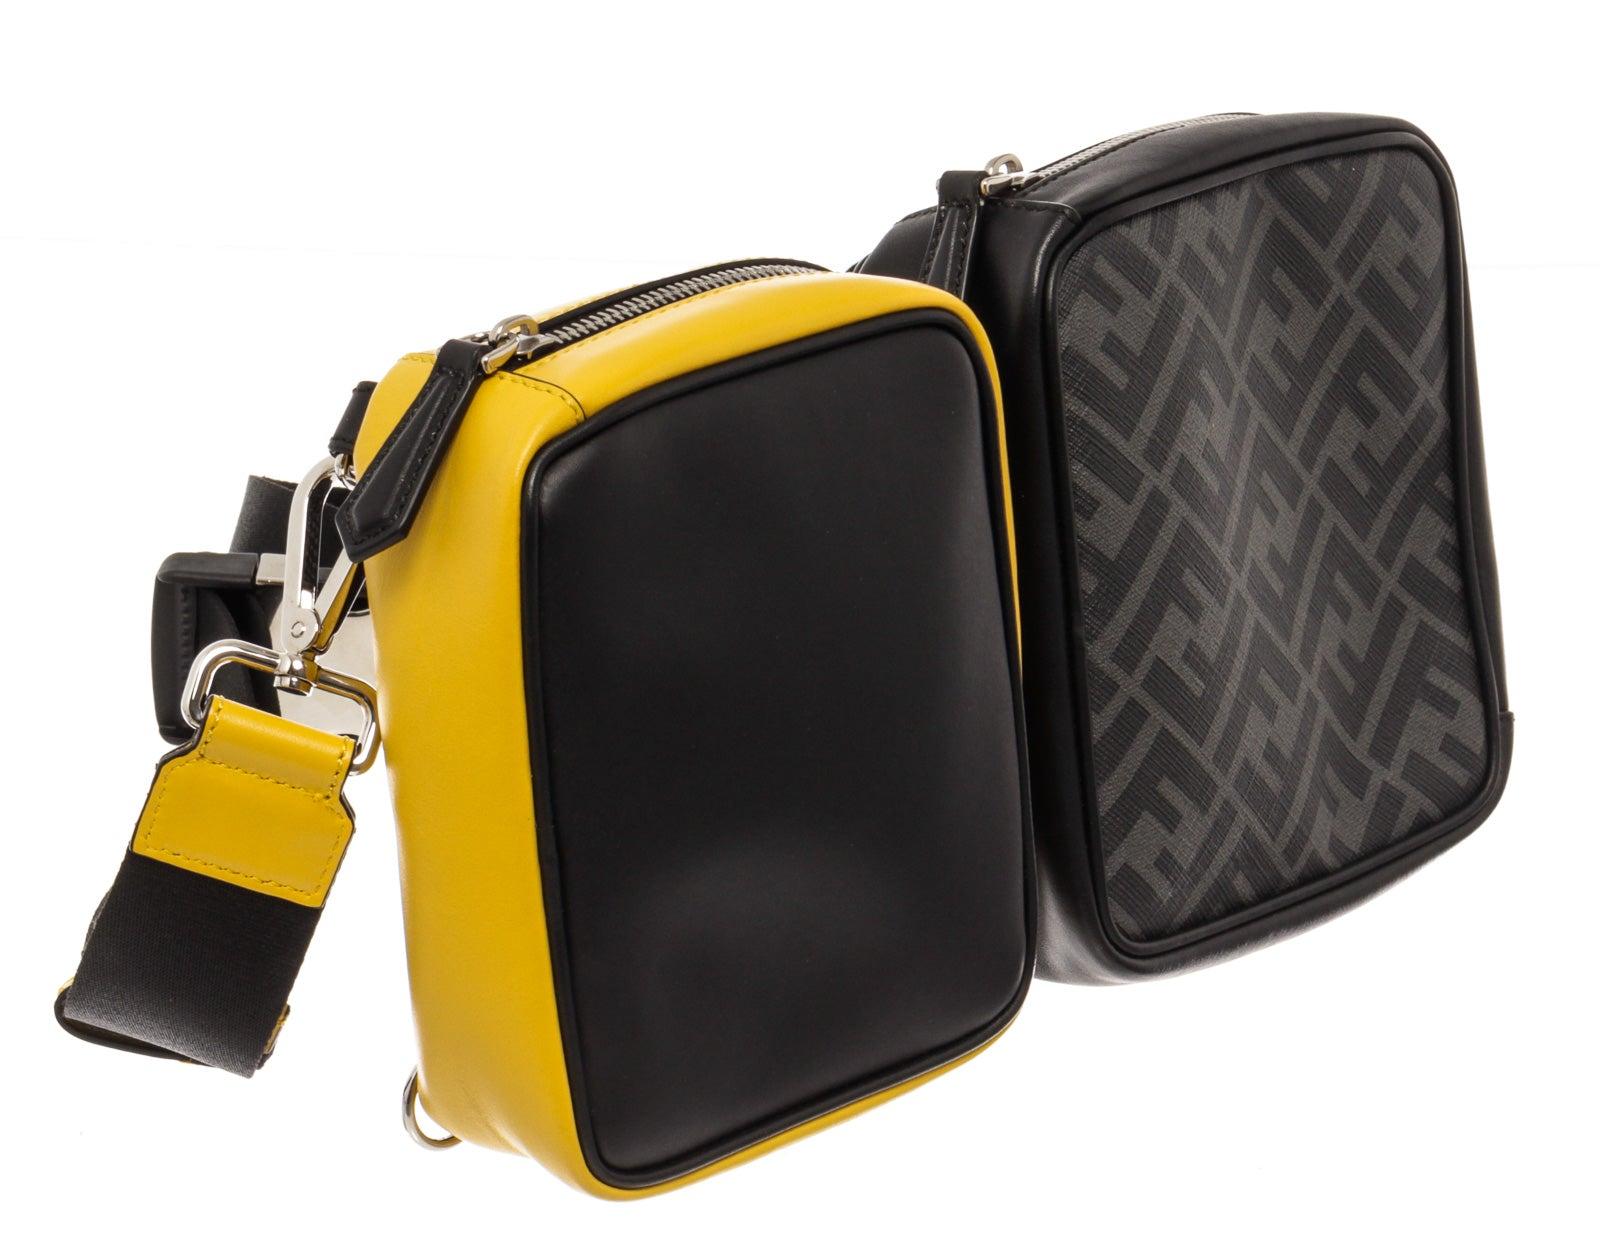 Fendi Black Yellow Calfskin Leather Multi Pouch Forever Waist Bag In Good Condition For Sale In Irvine, CA